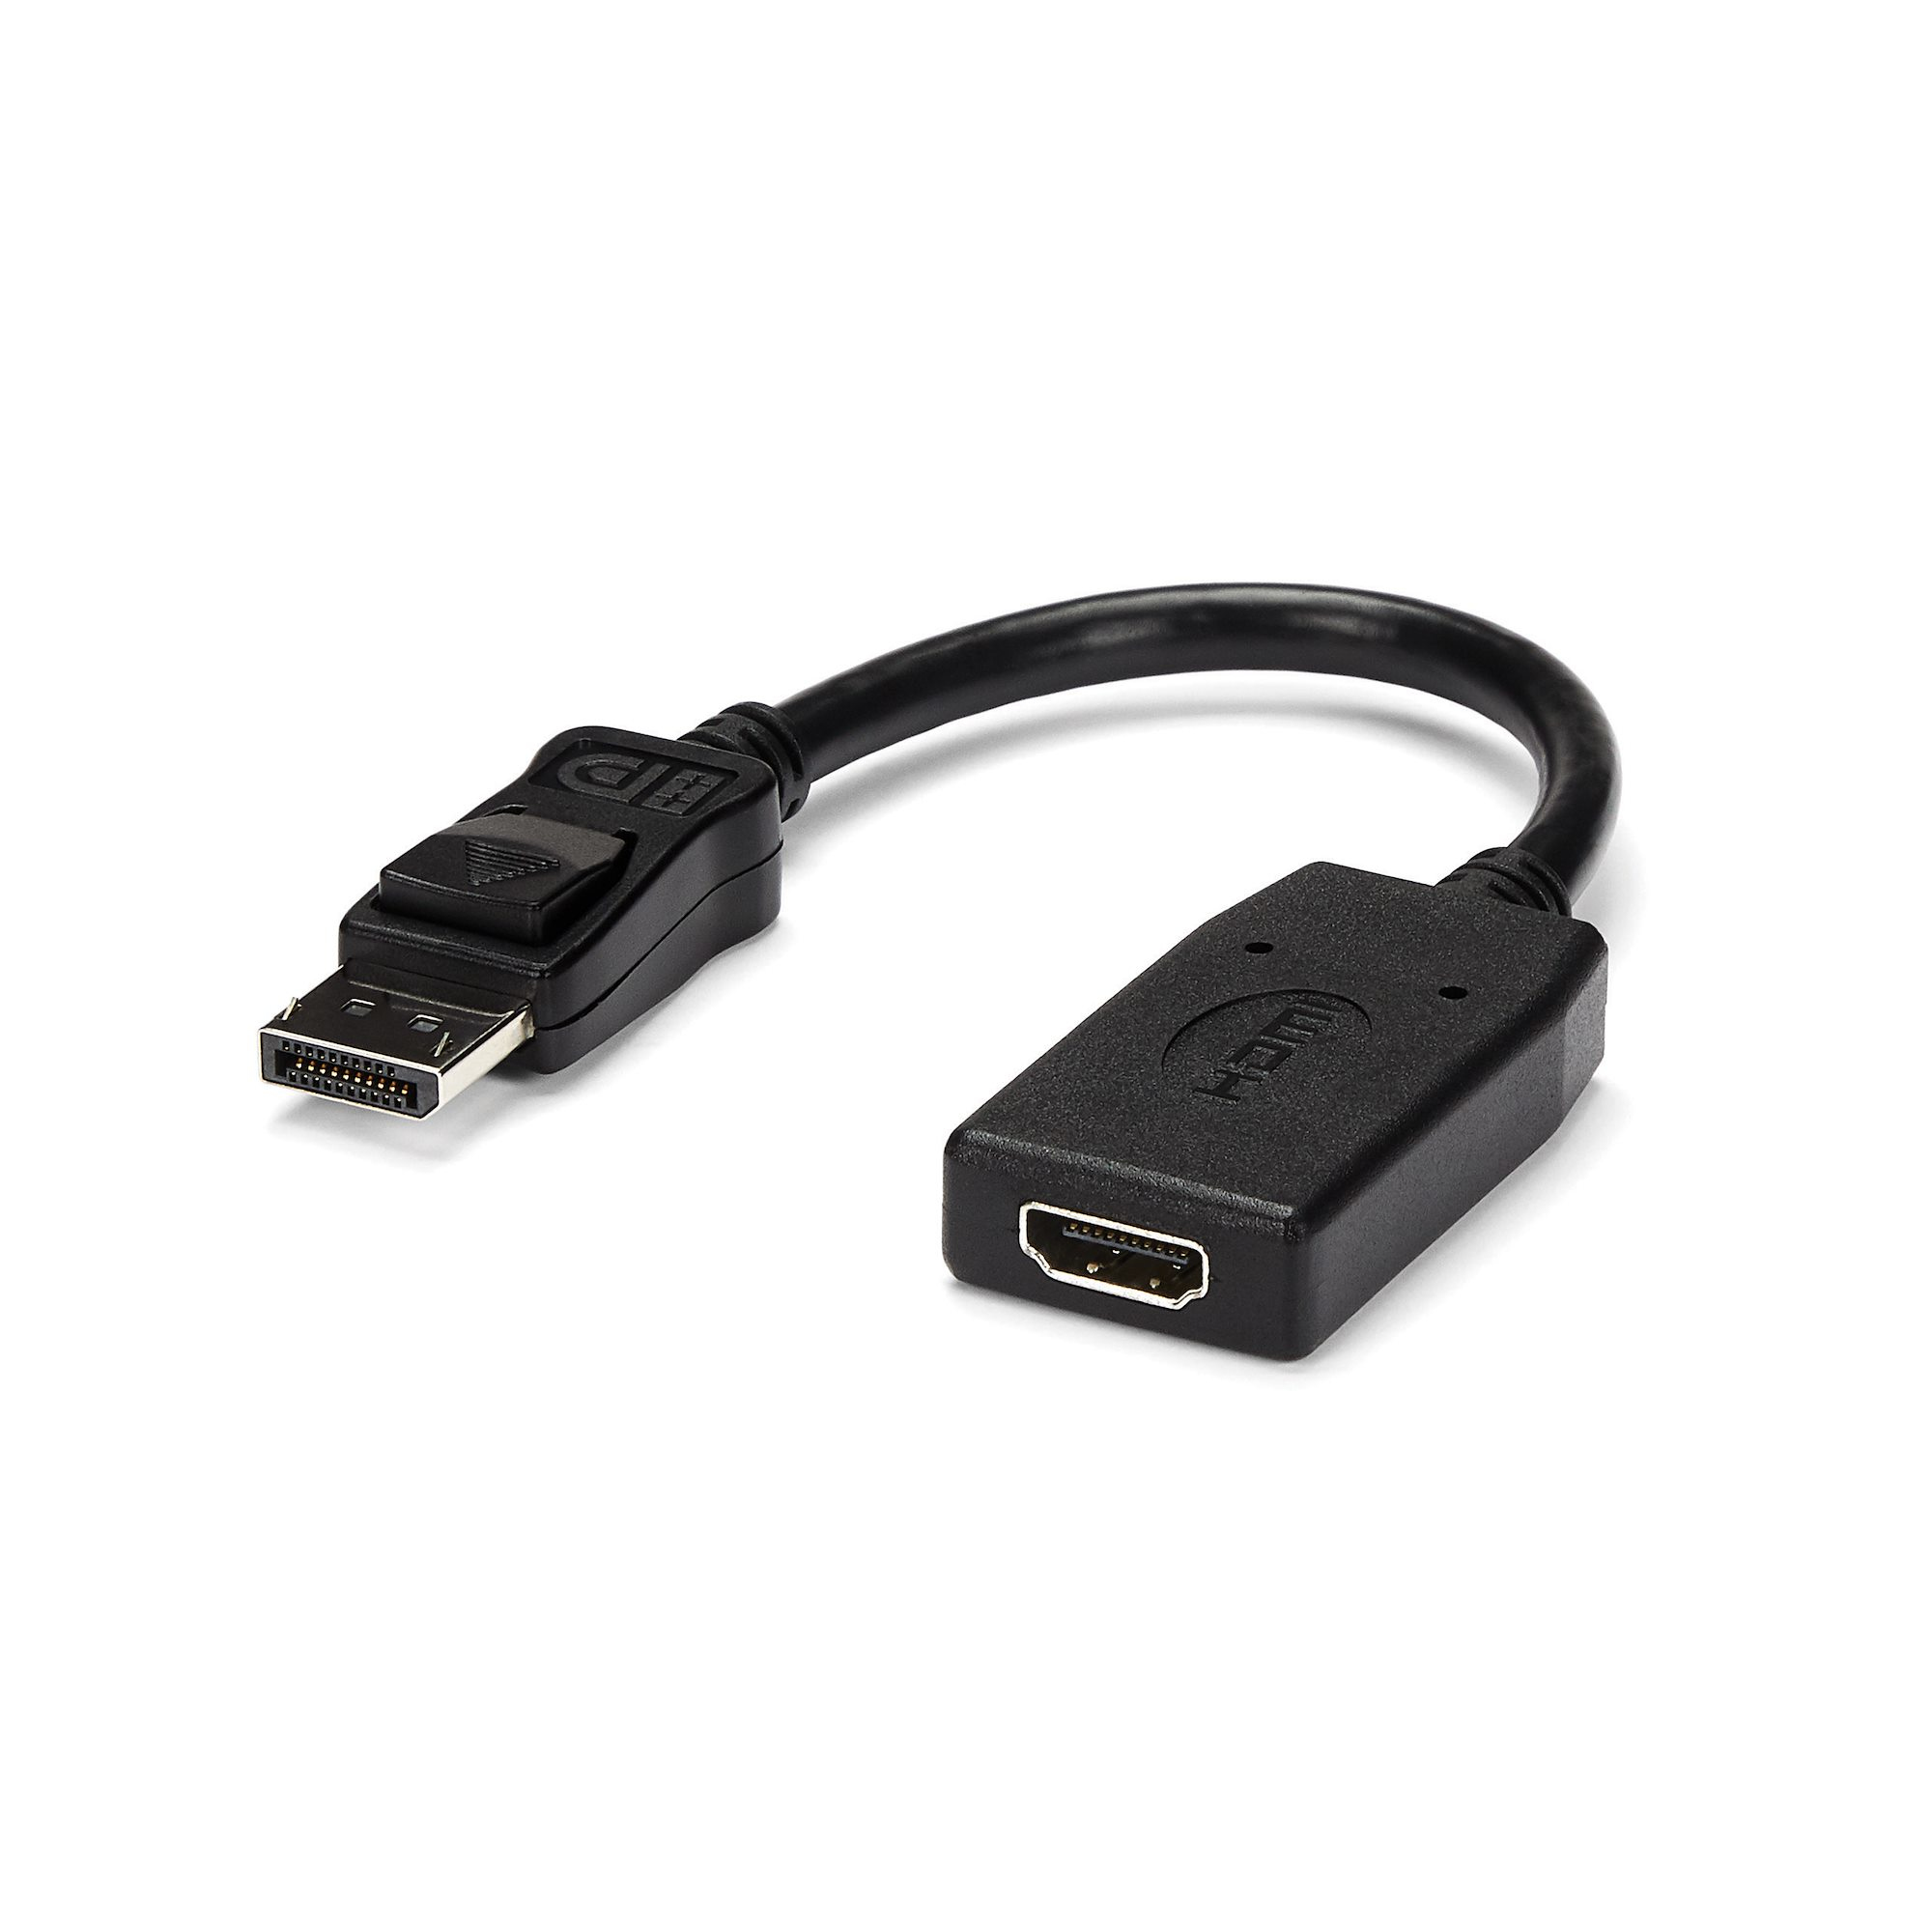 Photos - Cable (video, audio, USB) Startech.com DisplayPort to HDMI Adapter - DP to HDMI Adapter/Video Co DP2 